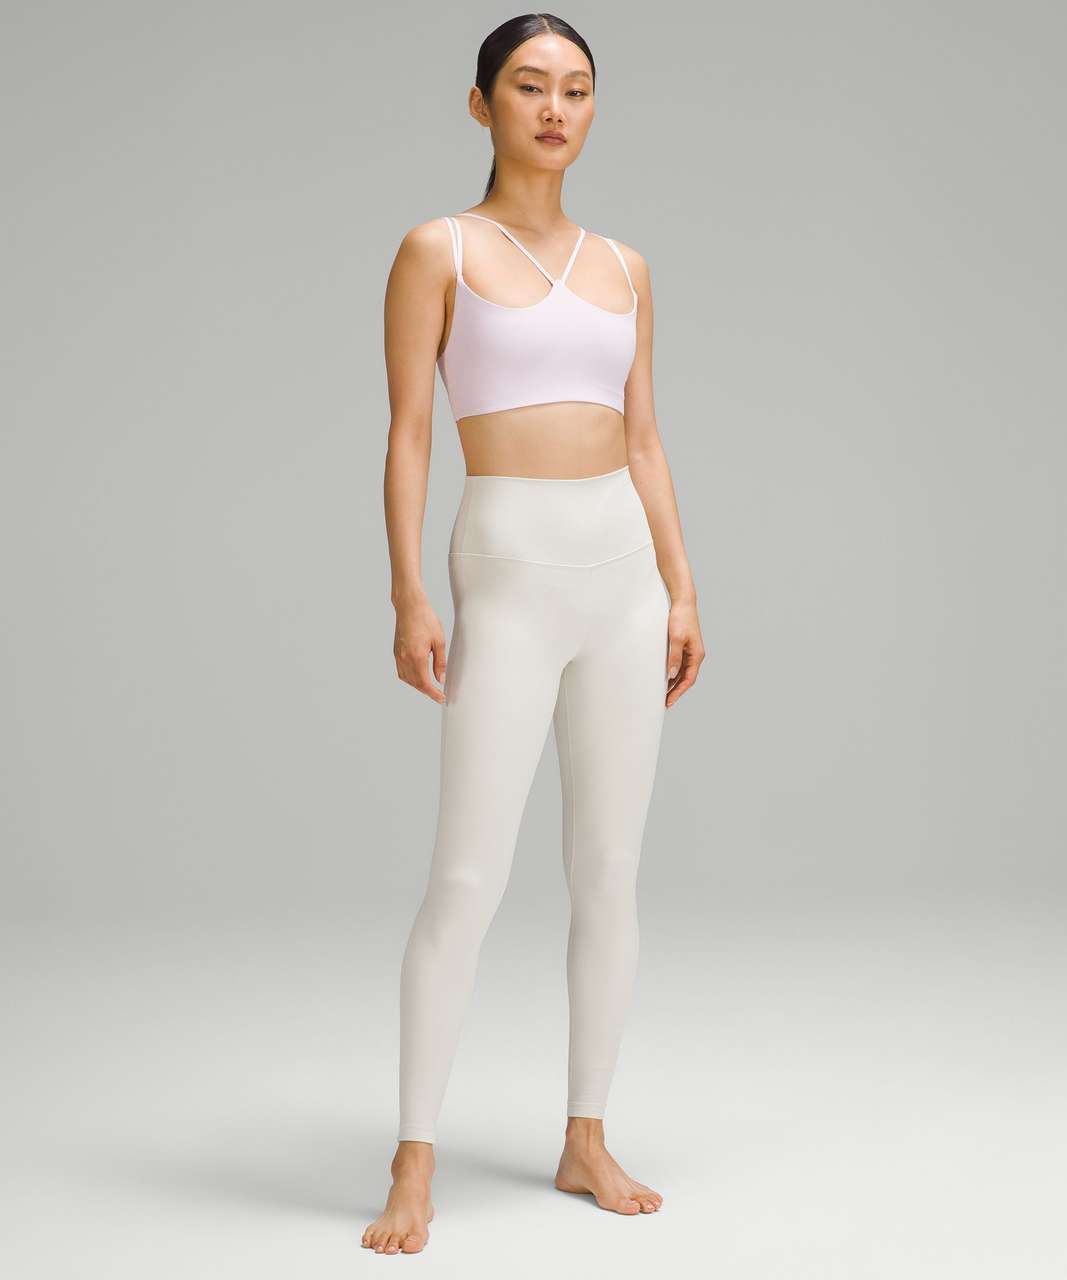 Lululemon Nulu Strappy Yoga Bra *Light Support, A/B Cup - Meadowsweet Pink